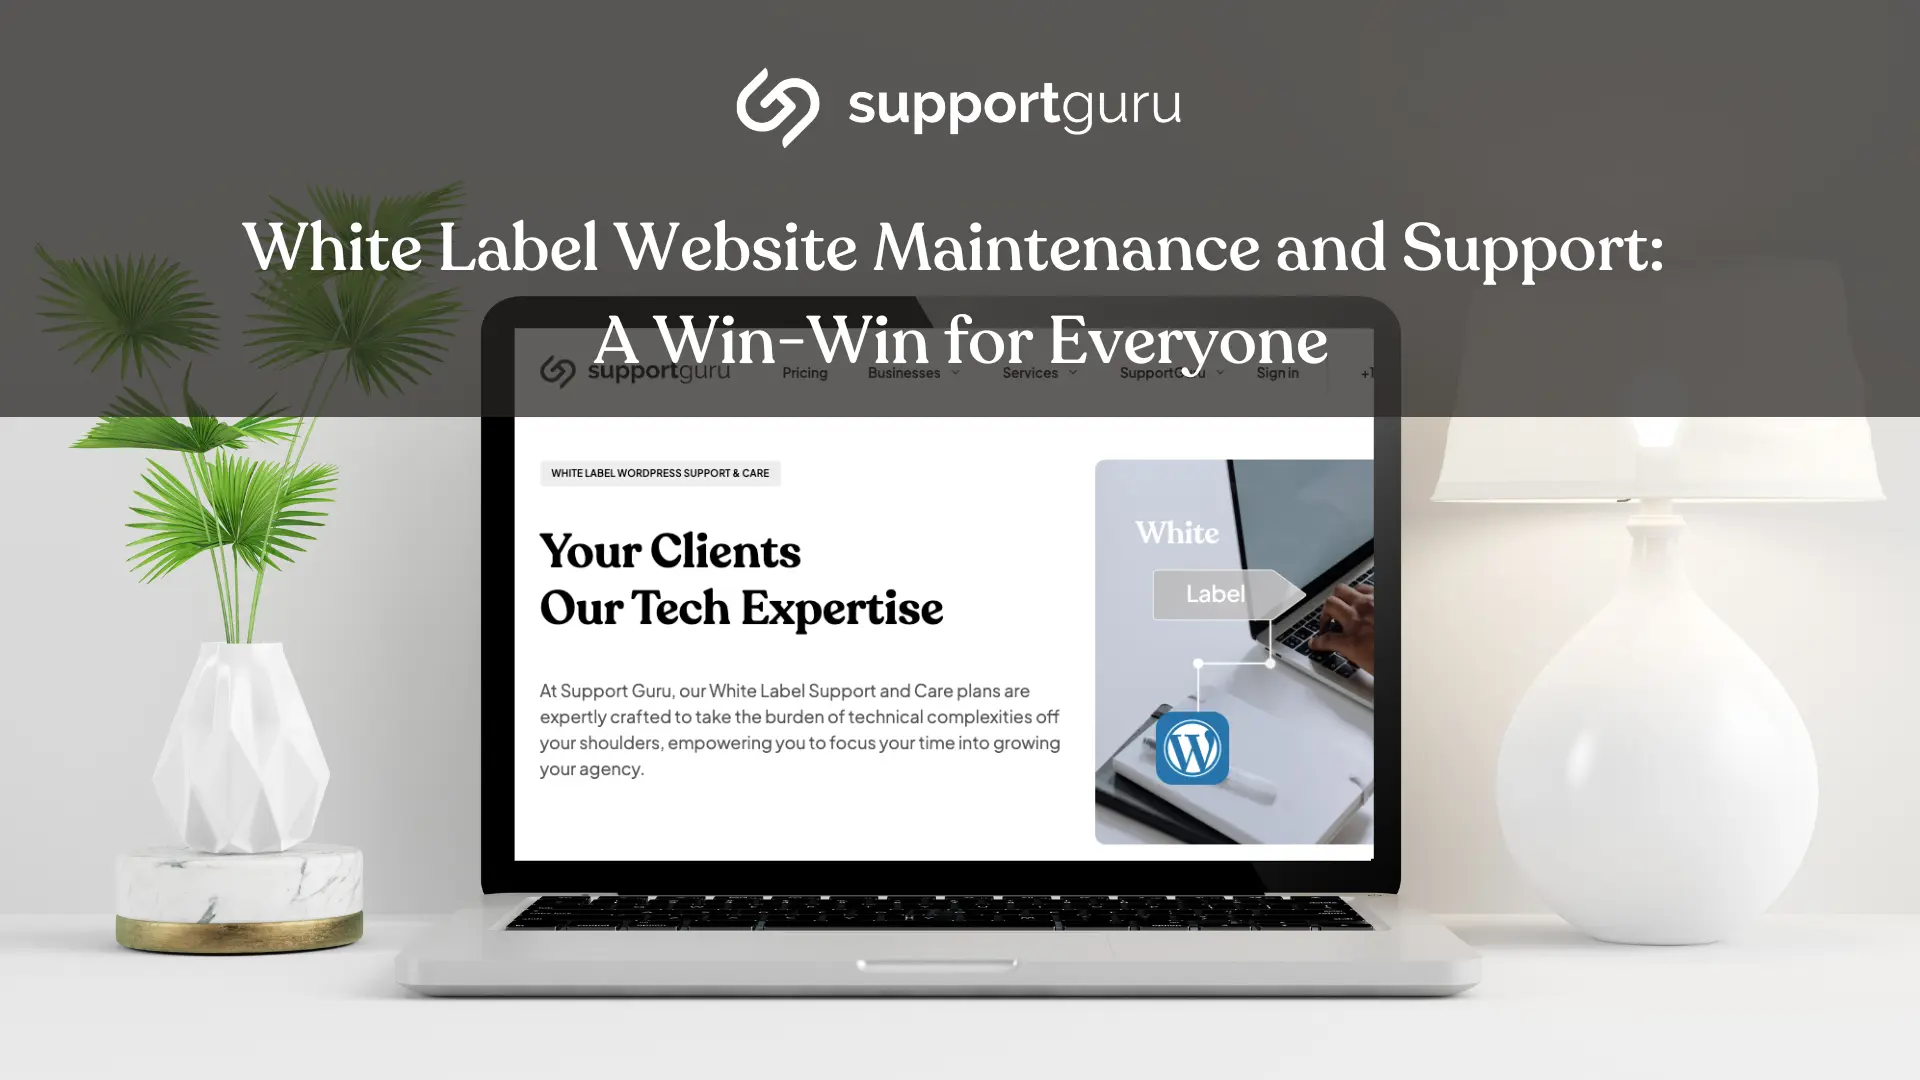 White Label Website Maintenance and Support